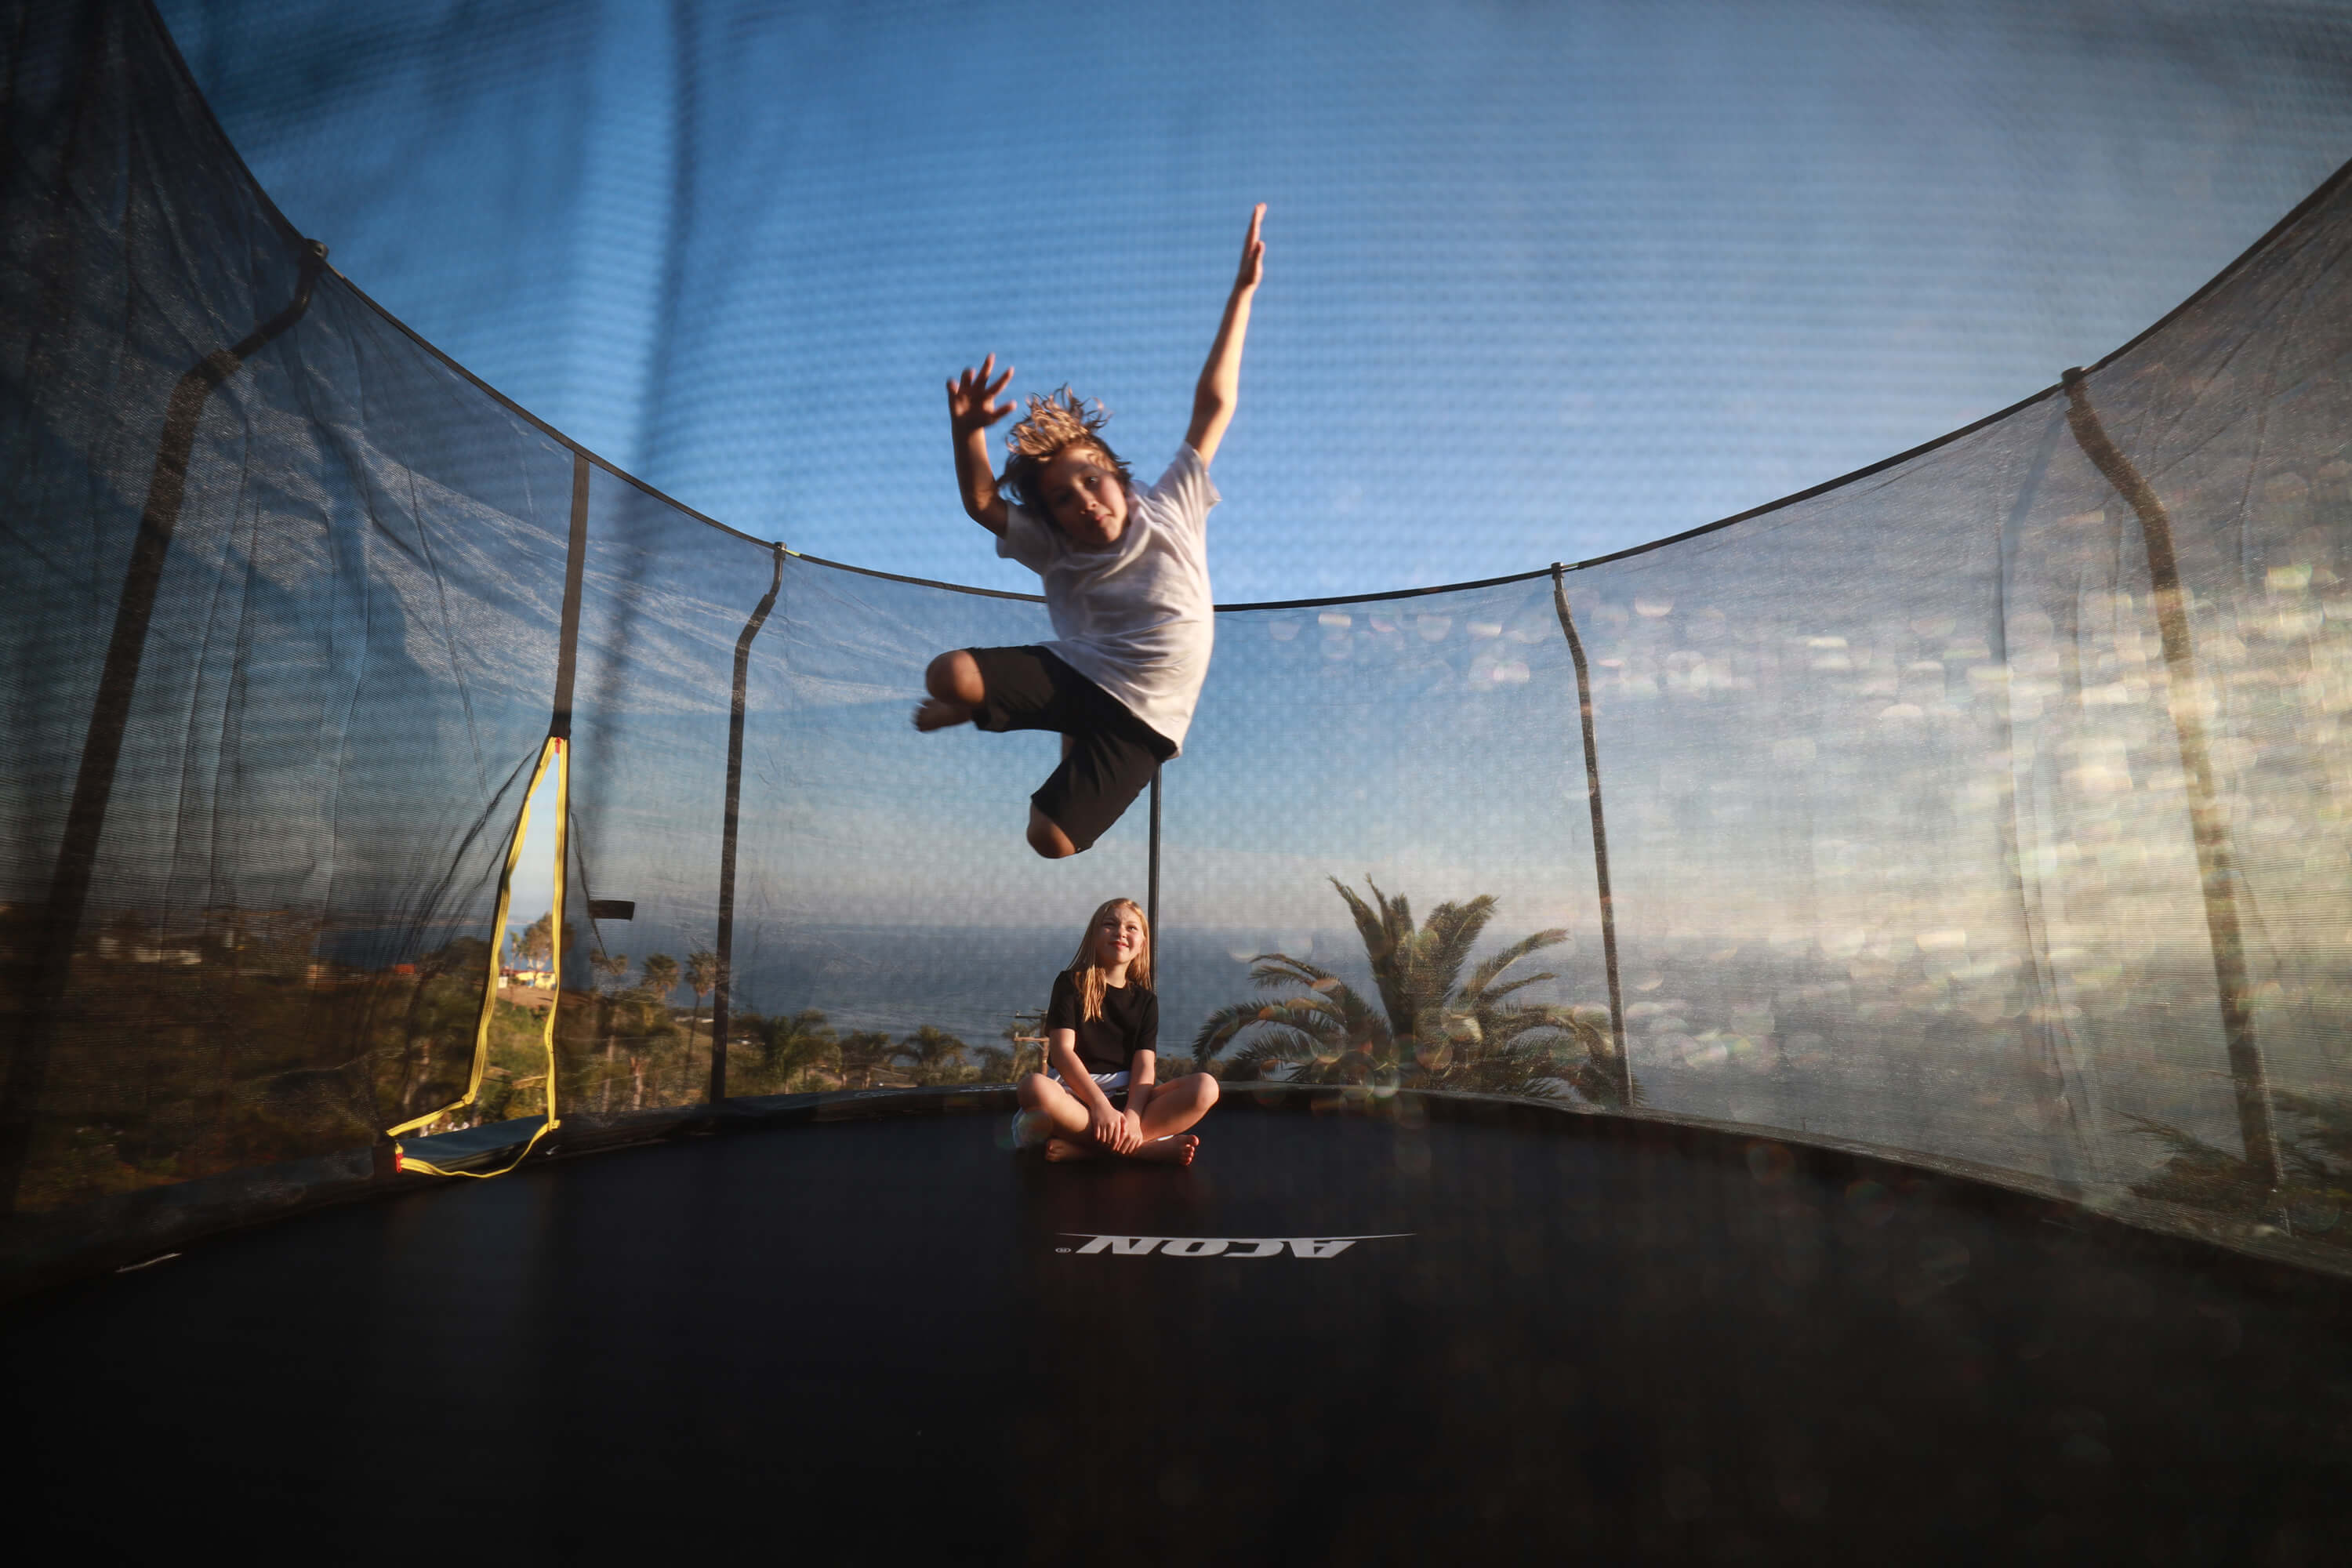 A boy jumps on a round trampoline, a girl sits on the edge and watches.